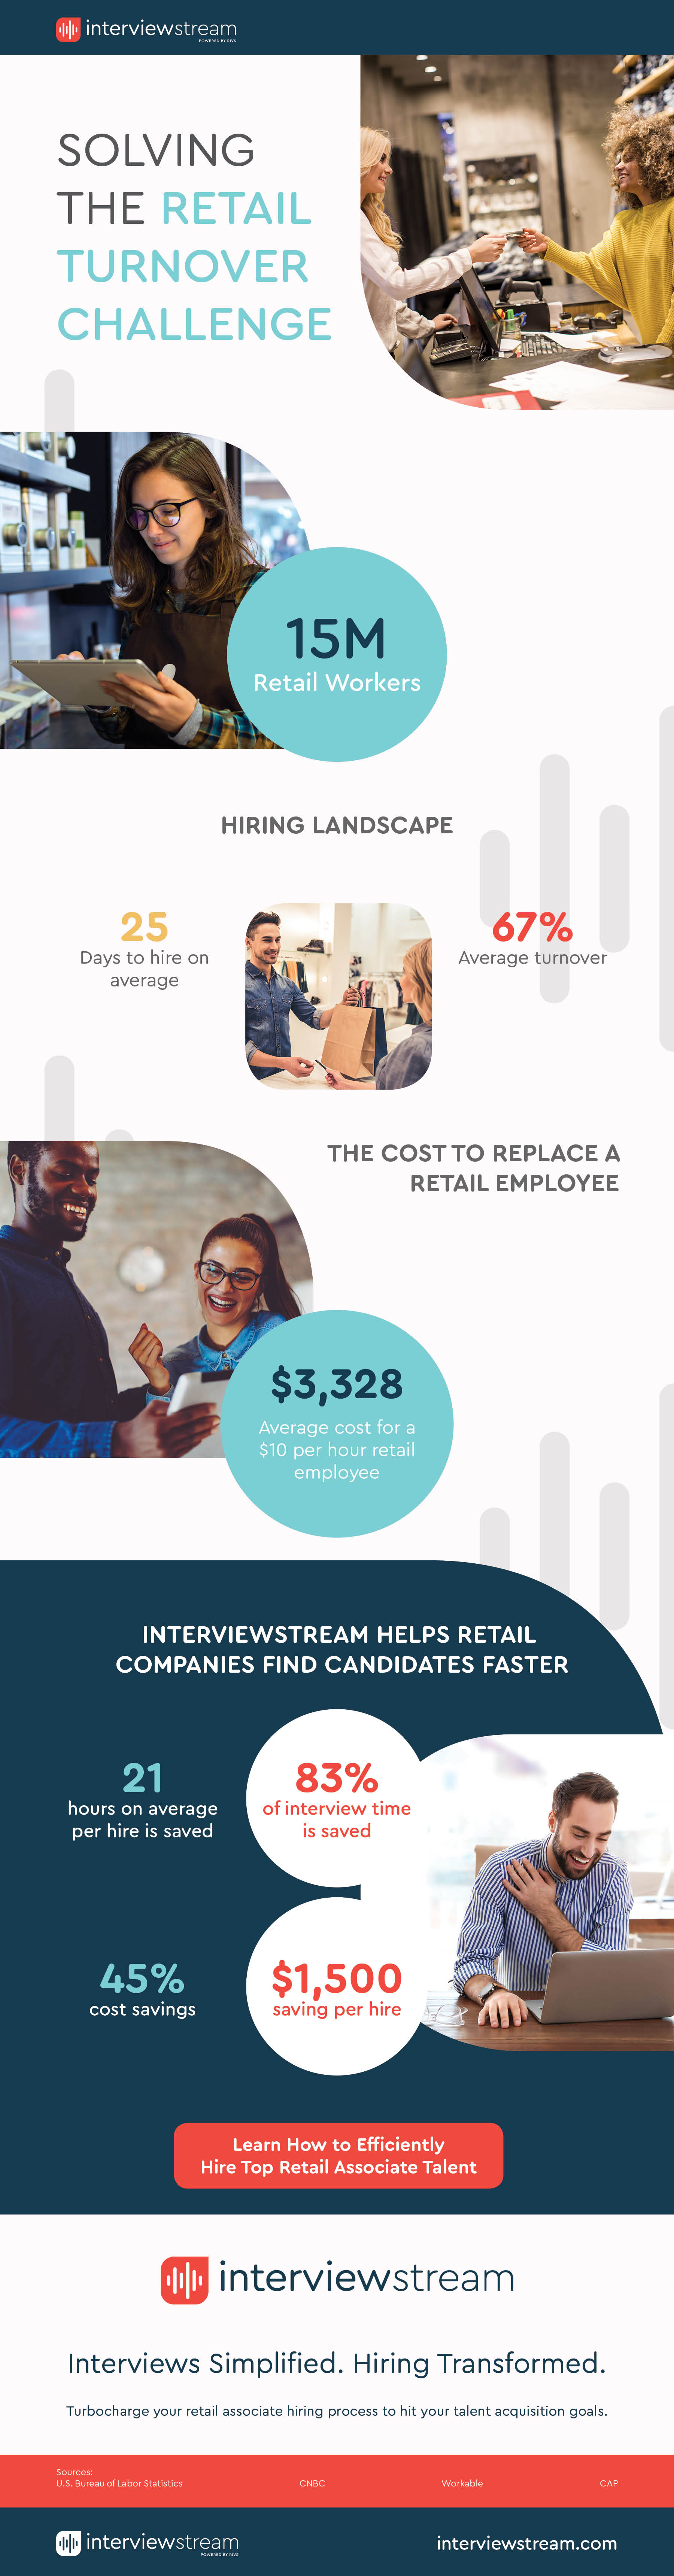 Infographic explaining how to solve the retail turnover challenge with video interviewing.